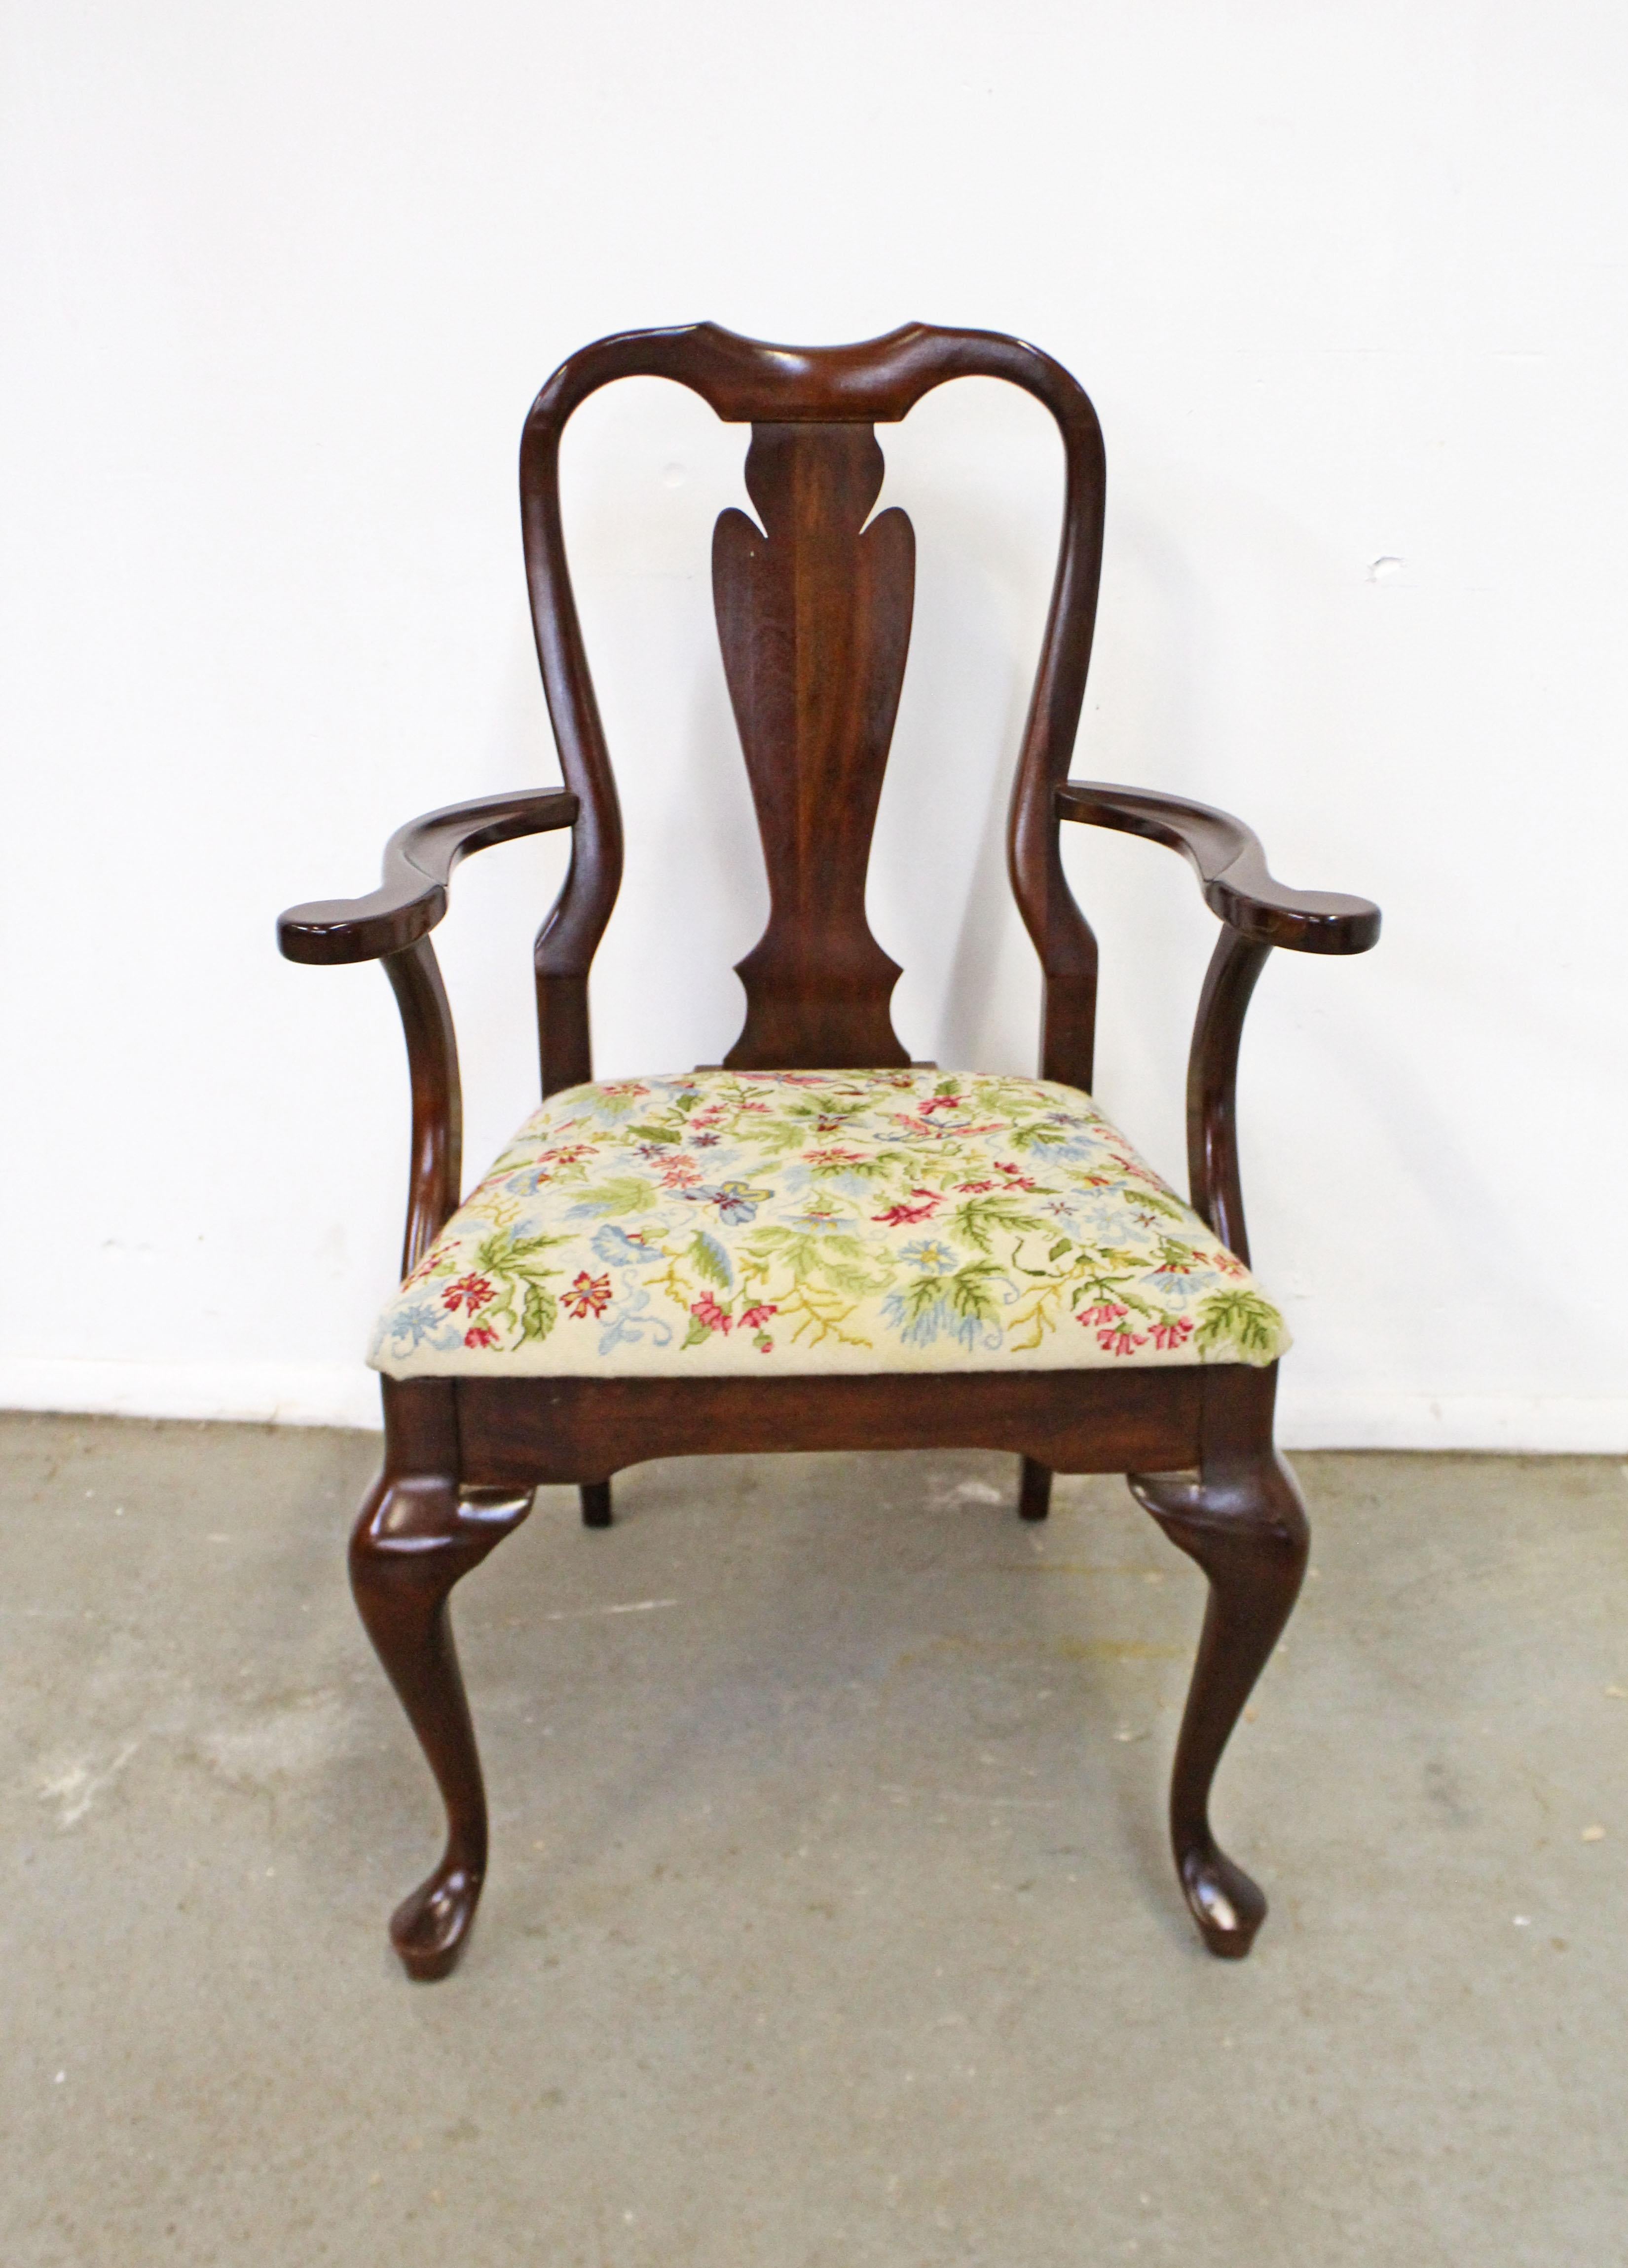 Offered is a vintage Queen Anne side chair. It's made of solid cherrywood and has a beautifully stitched floral upholstered seat. In good condition for its age, with some slight surface scratches or wear on the wood. The upholstery is in good